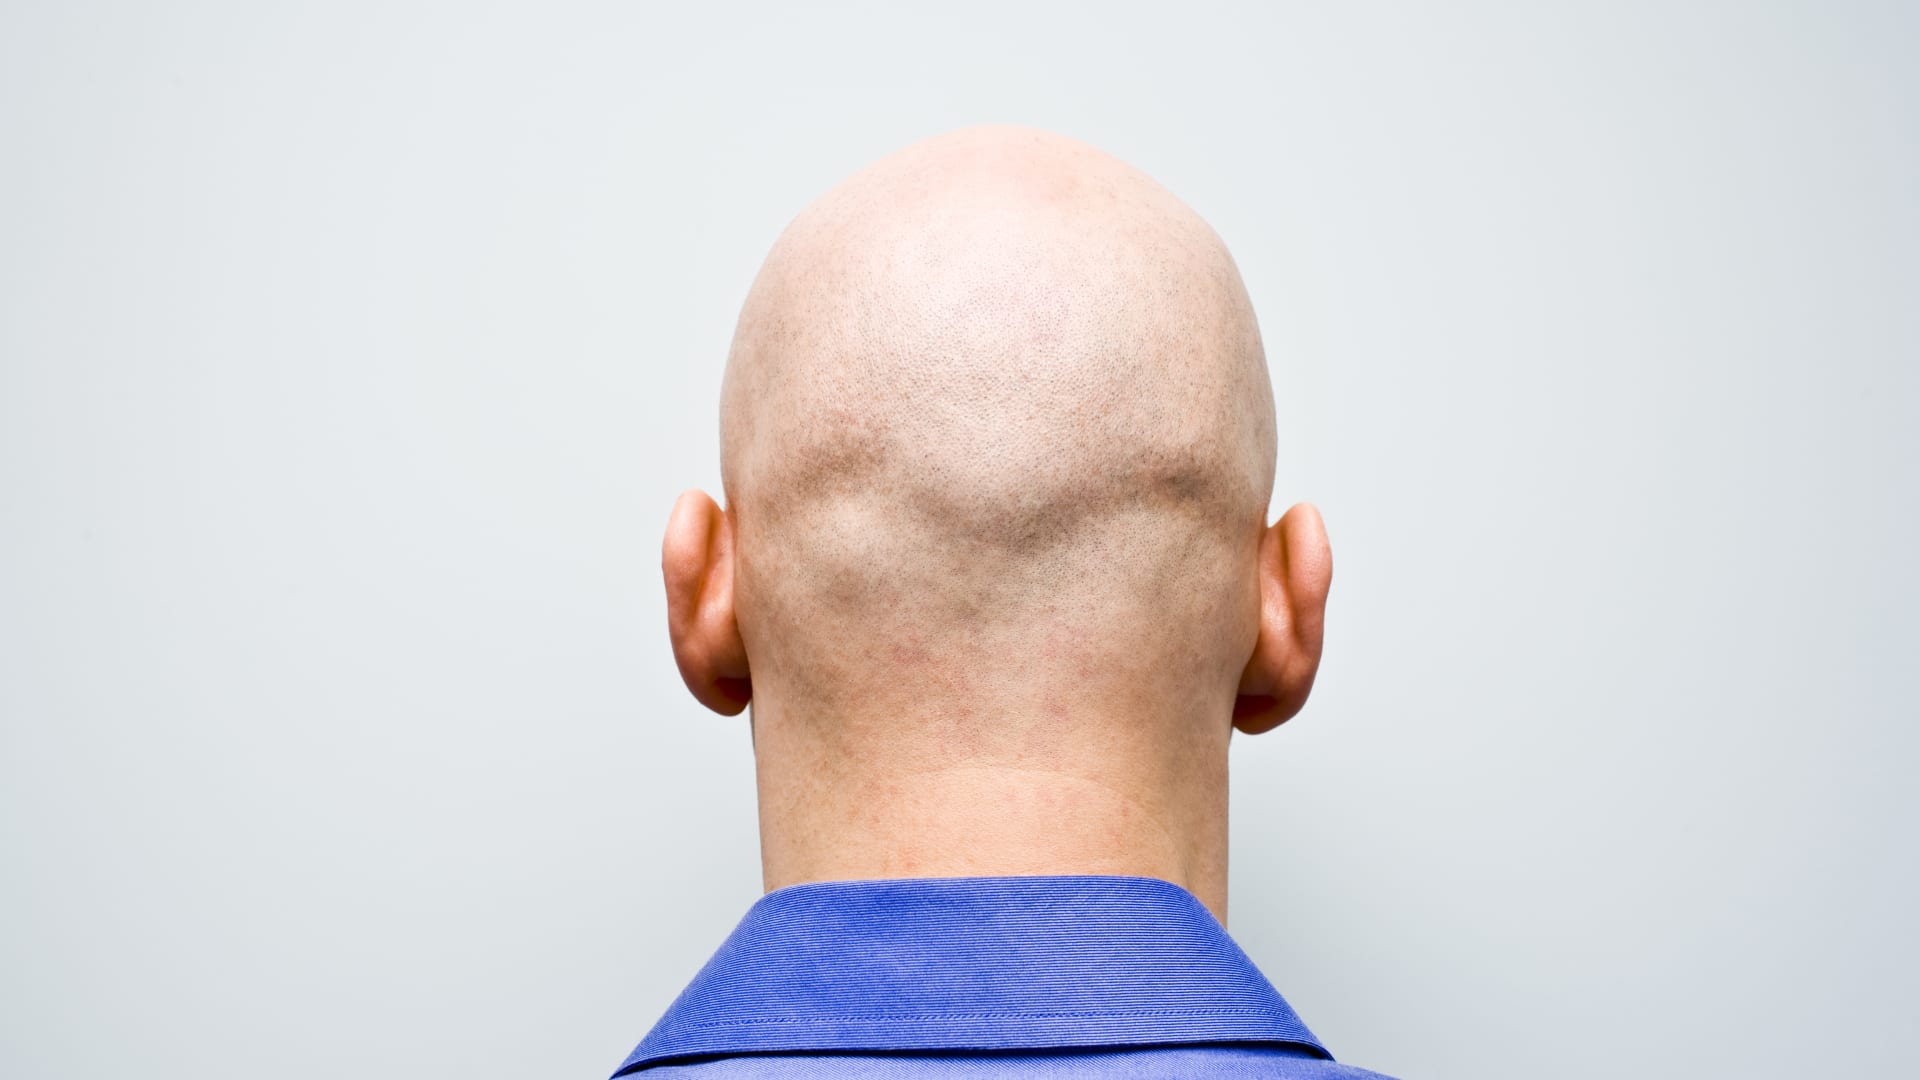 Three members of the tribunal who decided on the ruling, and alluded to their own experience of hair loss, said that baldness was more prevalent in me